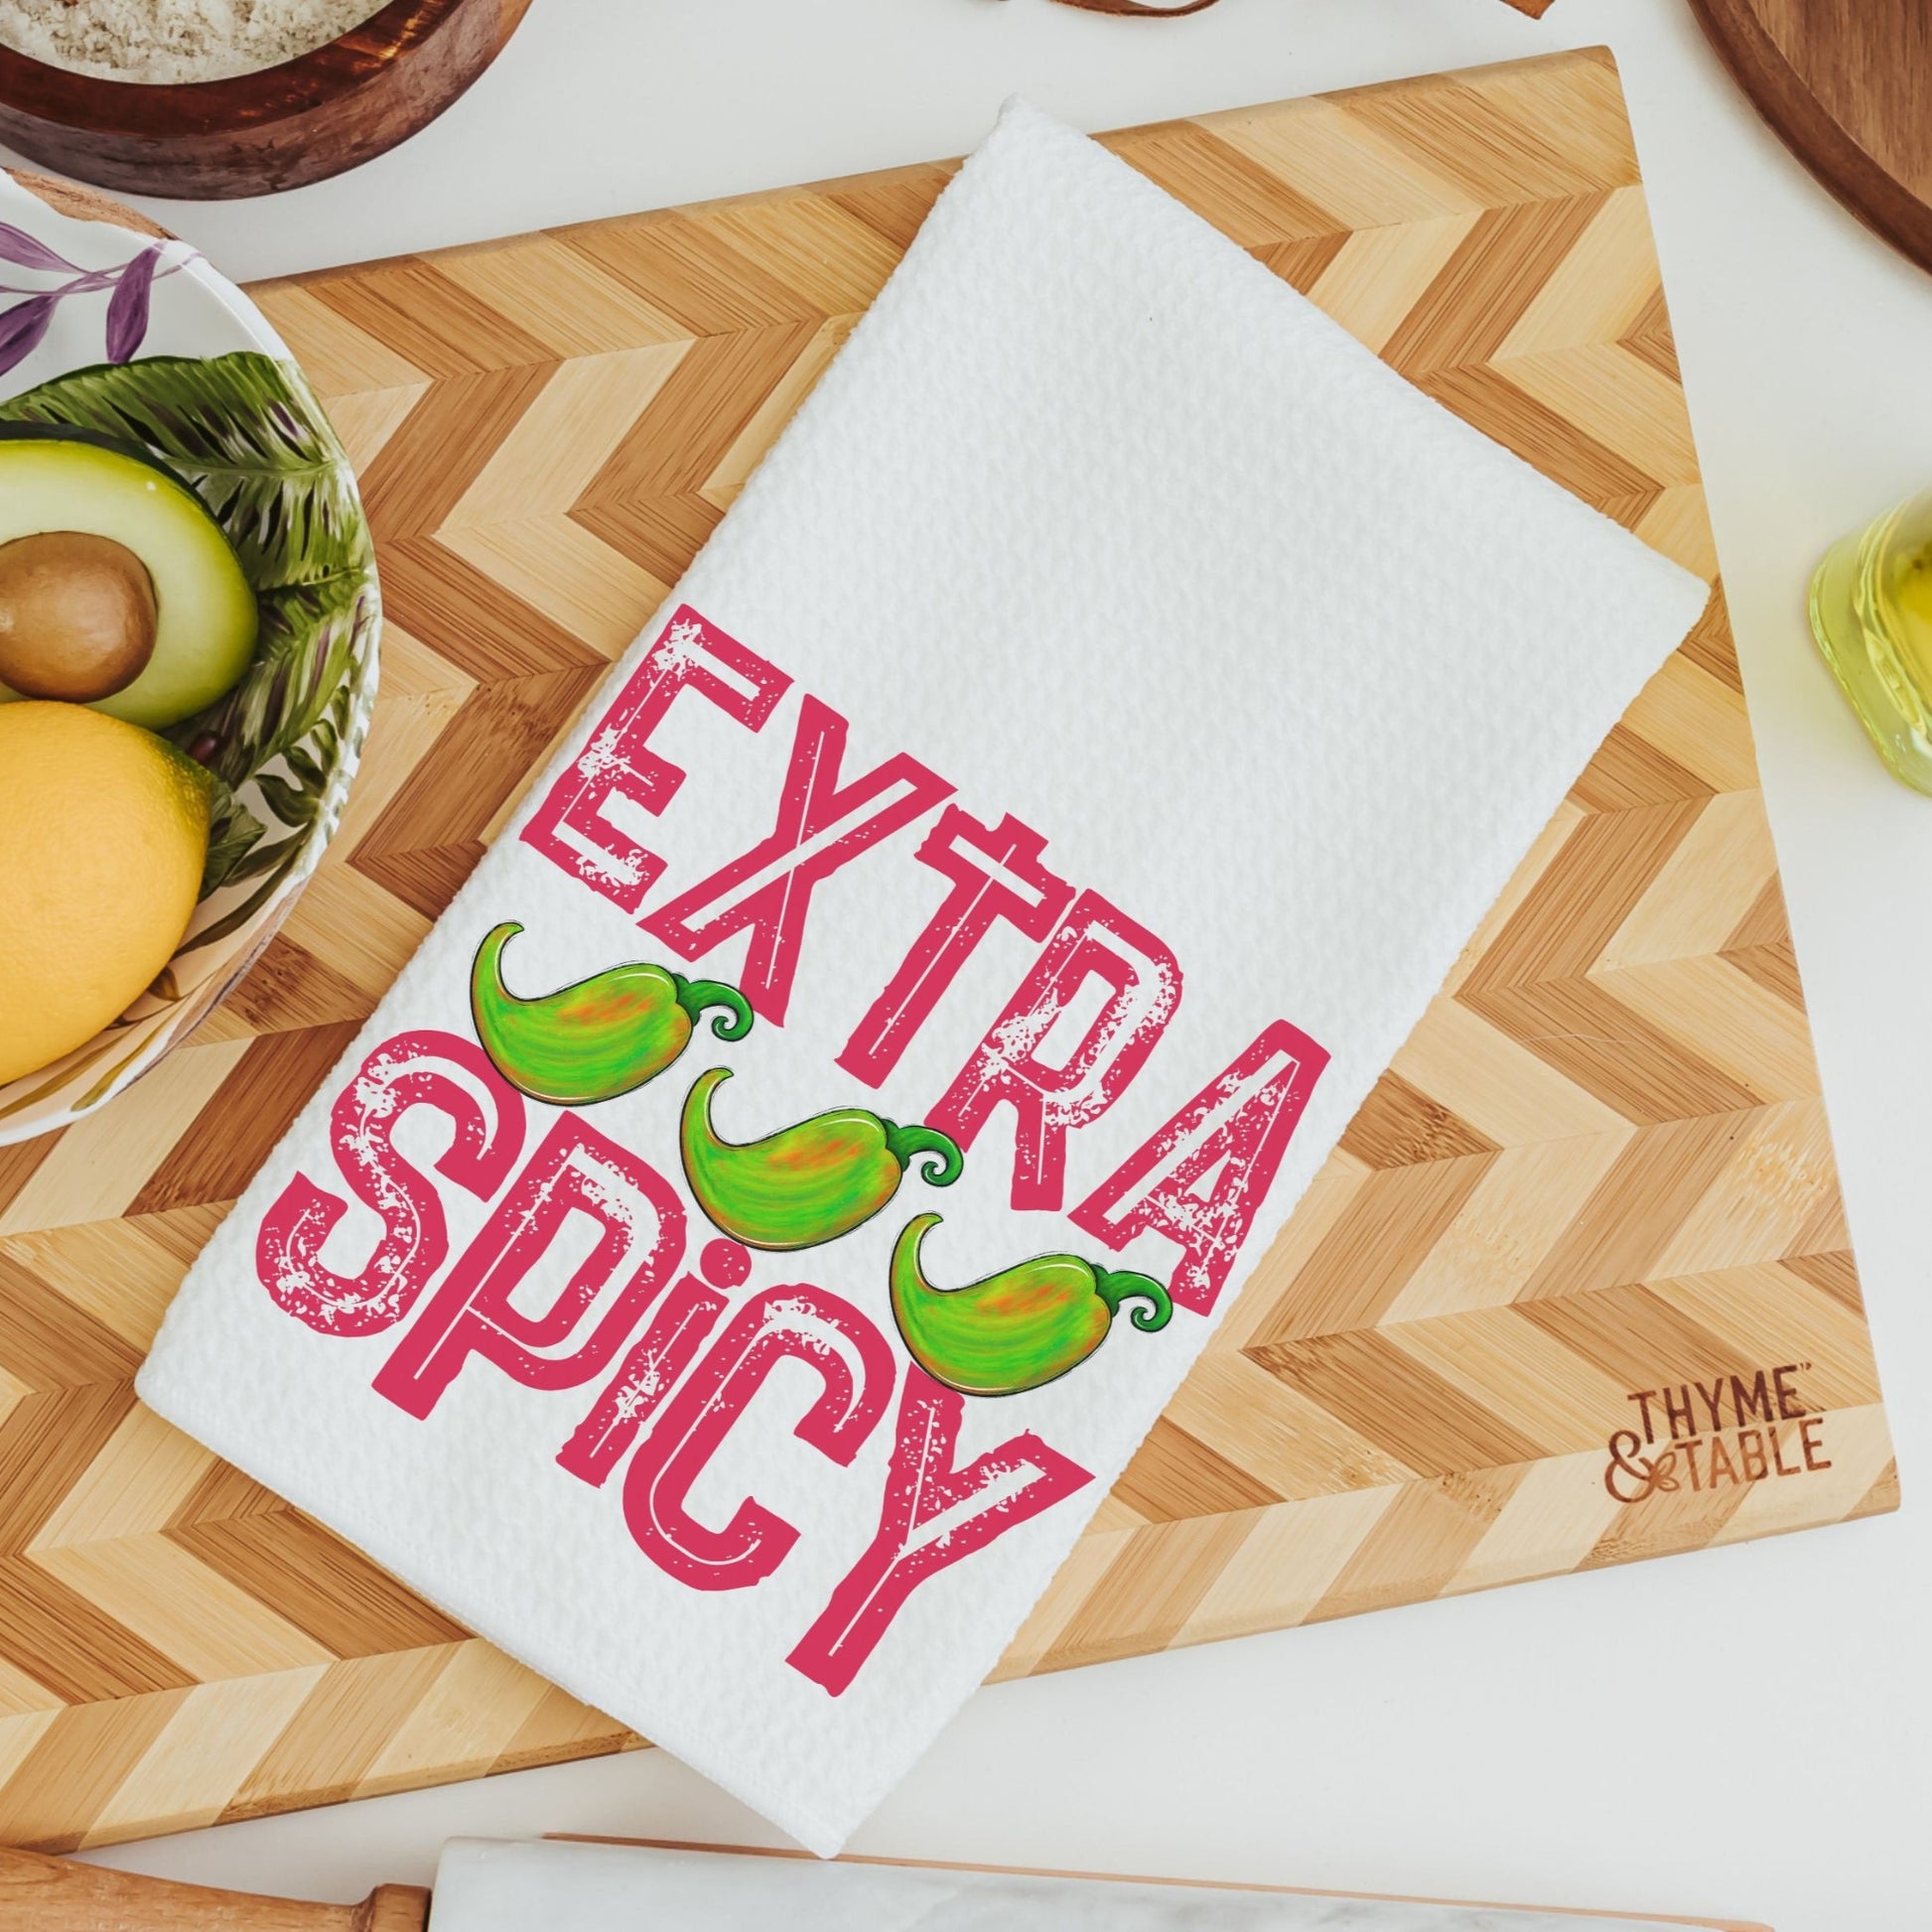 Extra spicy kitchen towels